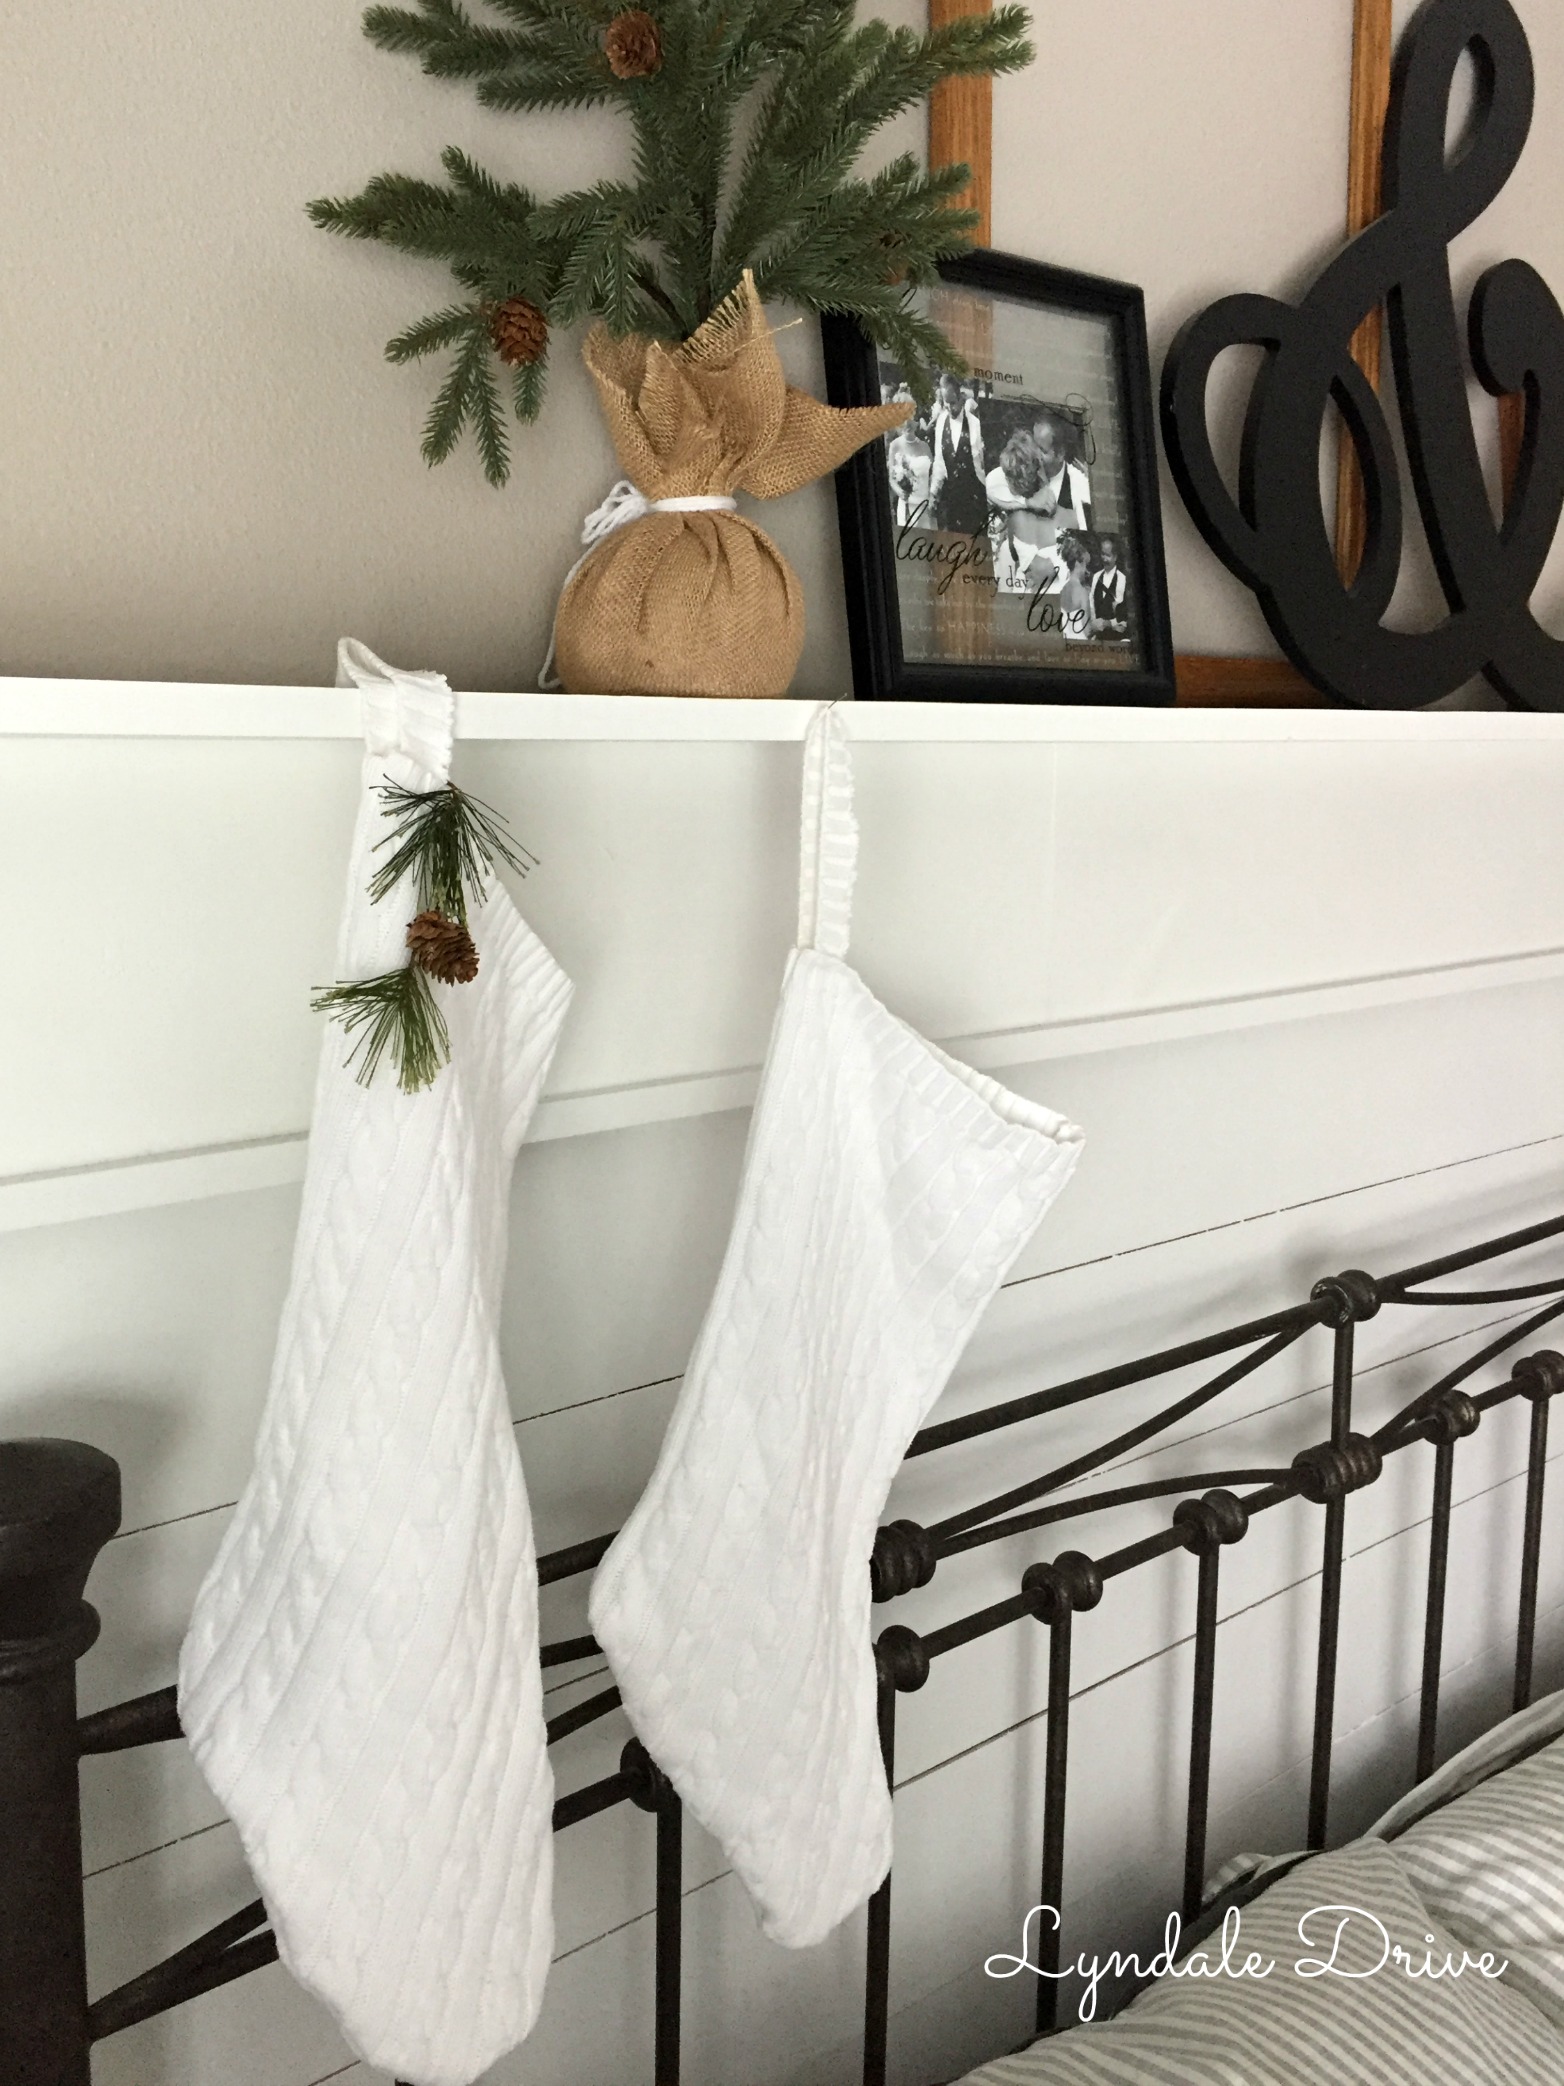 How to Upcycle Old Sweaters Into Christmas Stockings